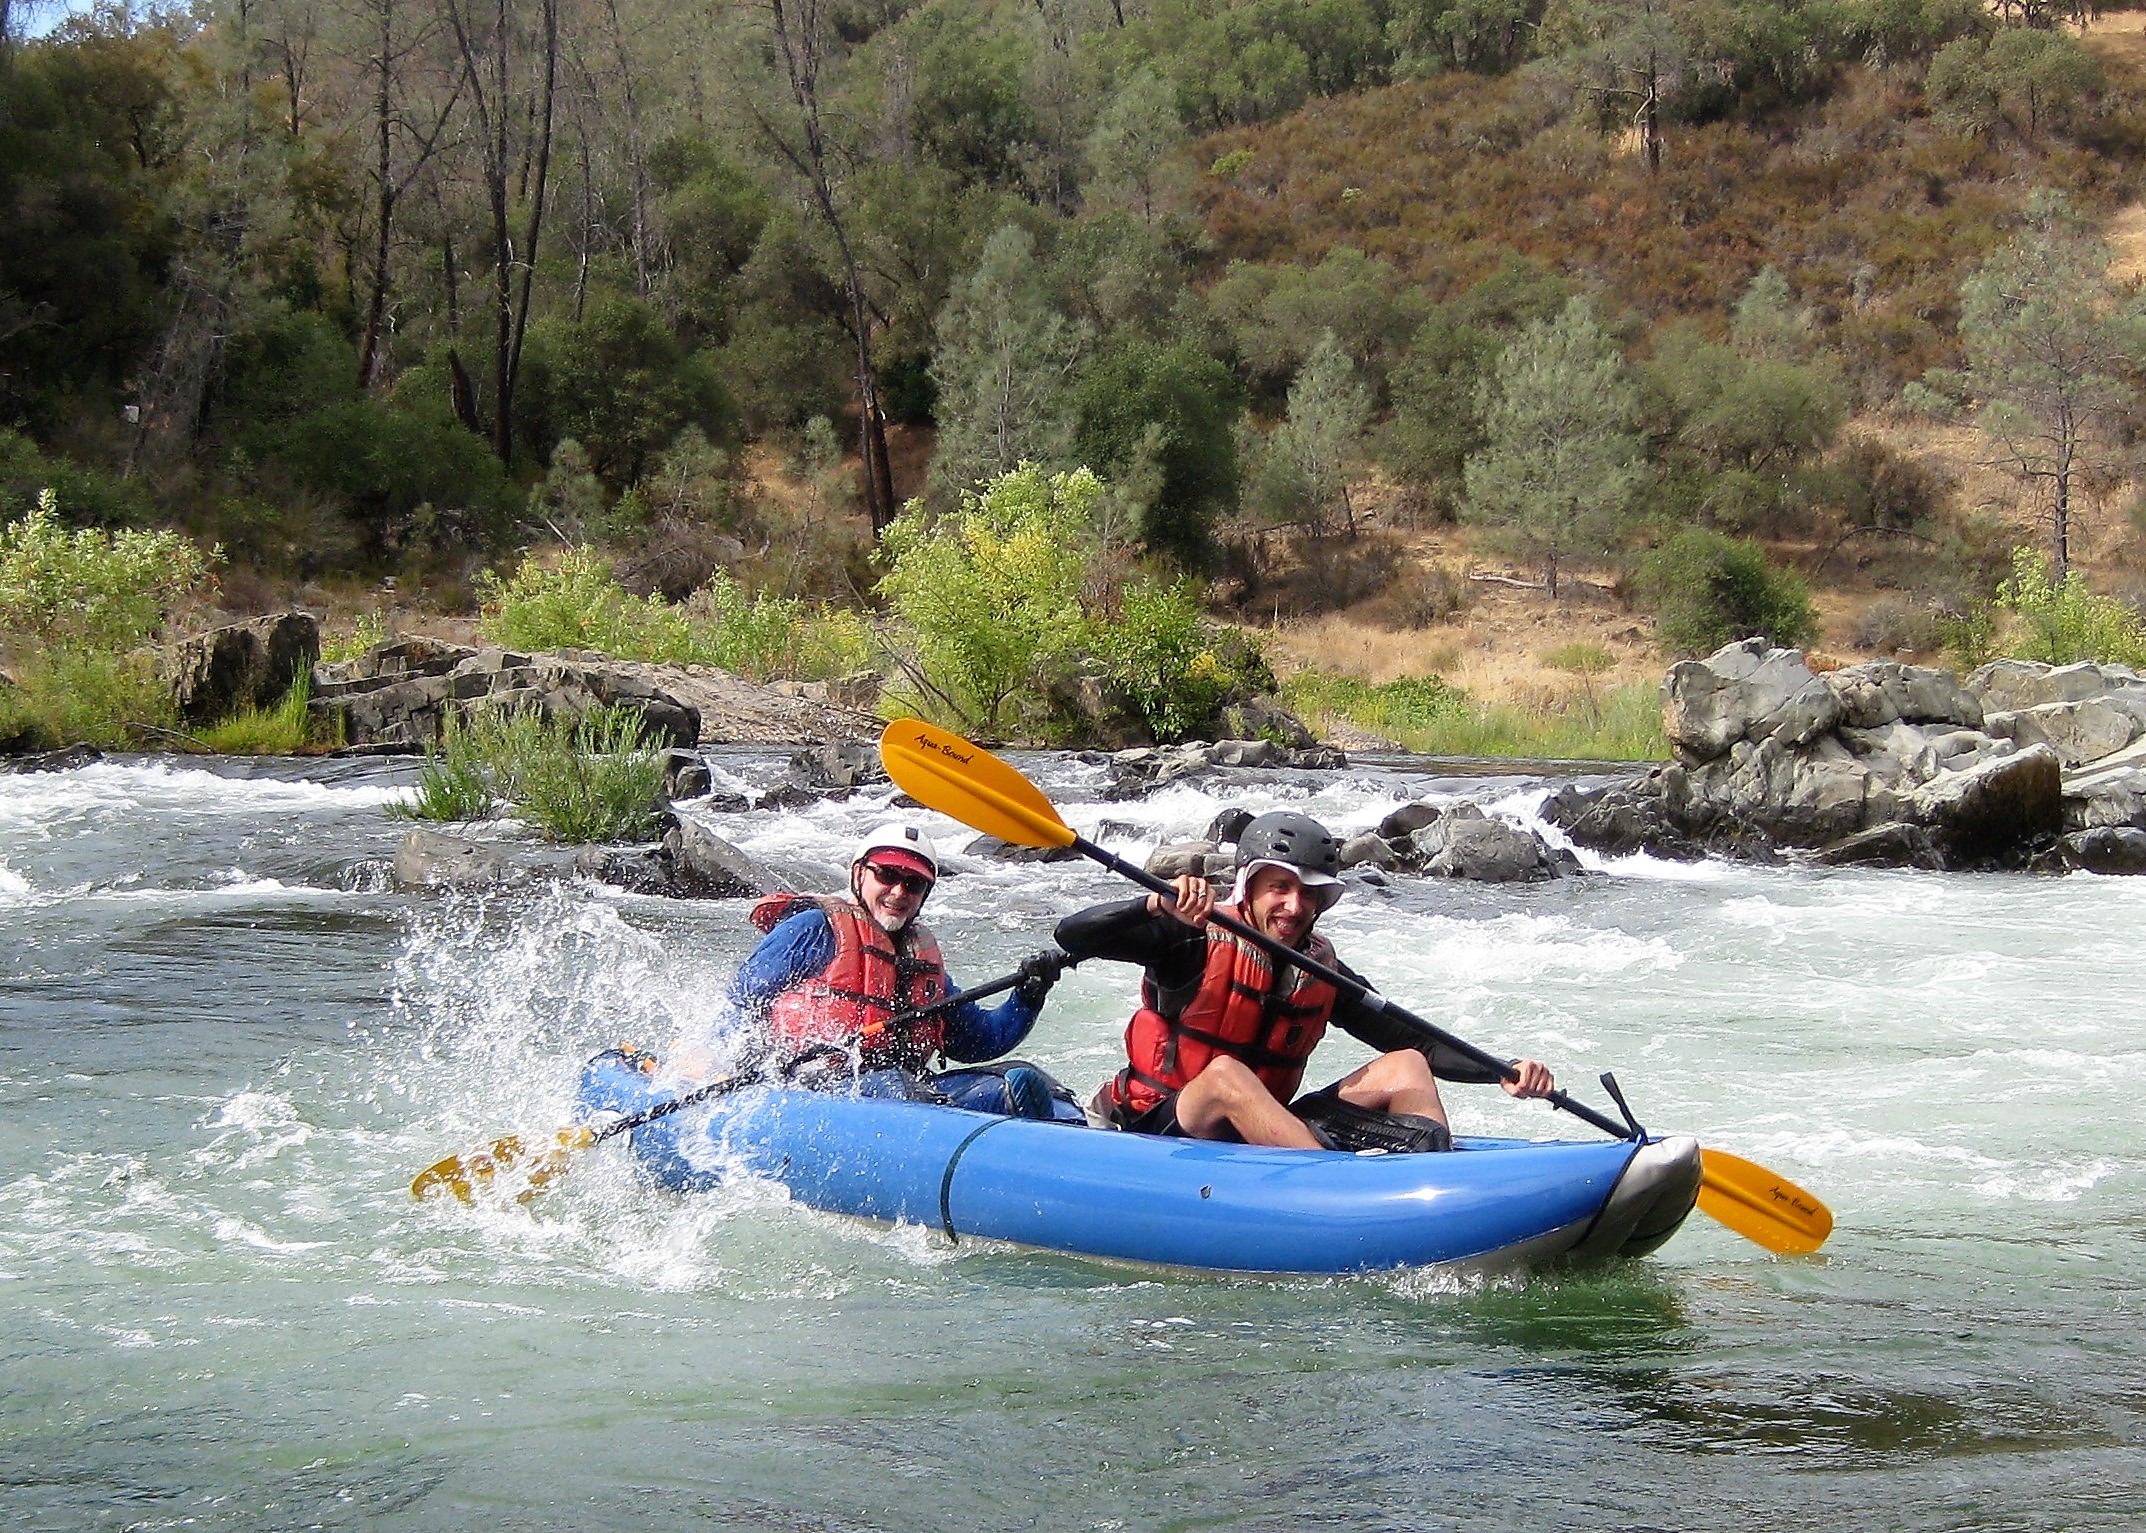 Lee Schmelter and Dani Lyra Having Just Bested Satans Cesspool in the American River Gorge 